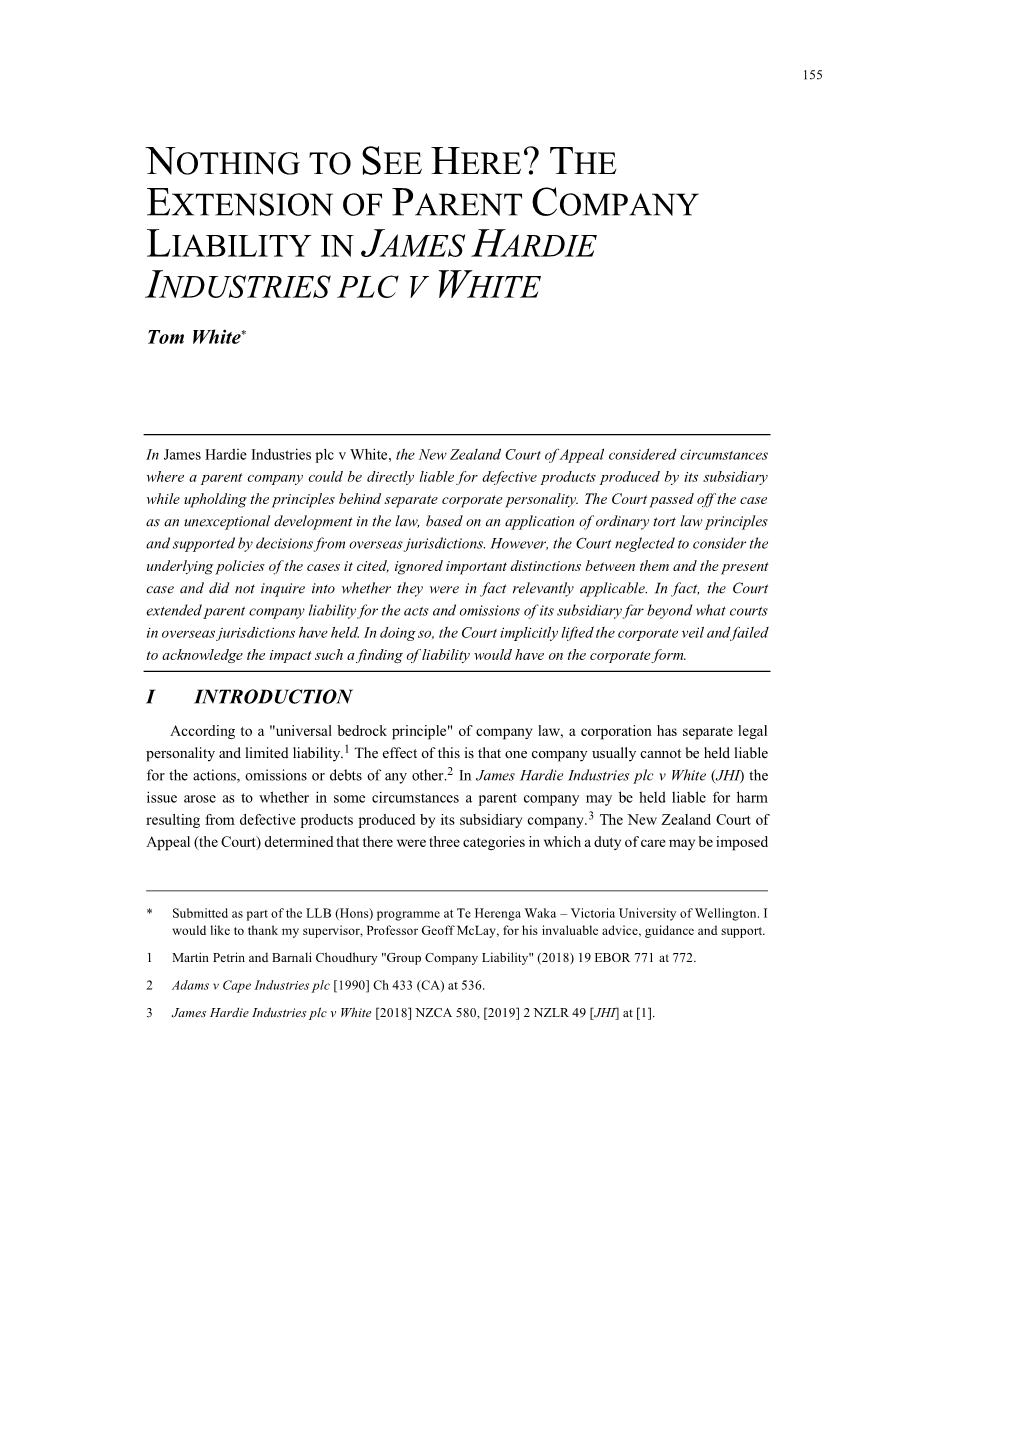 The Extension of Parent Company Liability in James Hardie Industries Plc V White